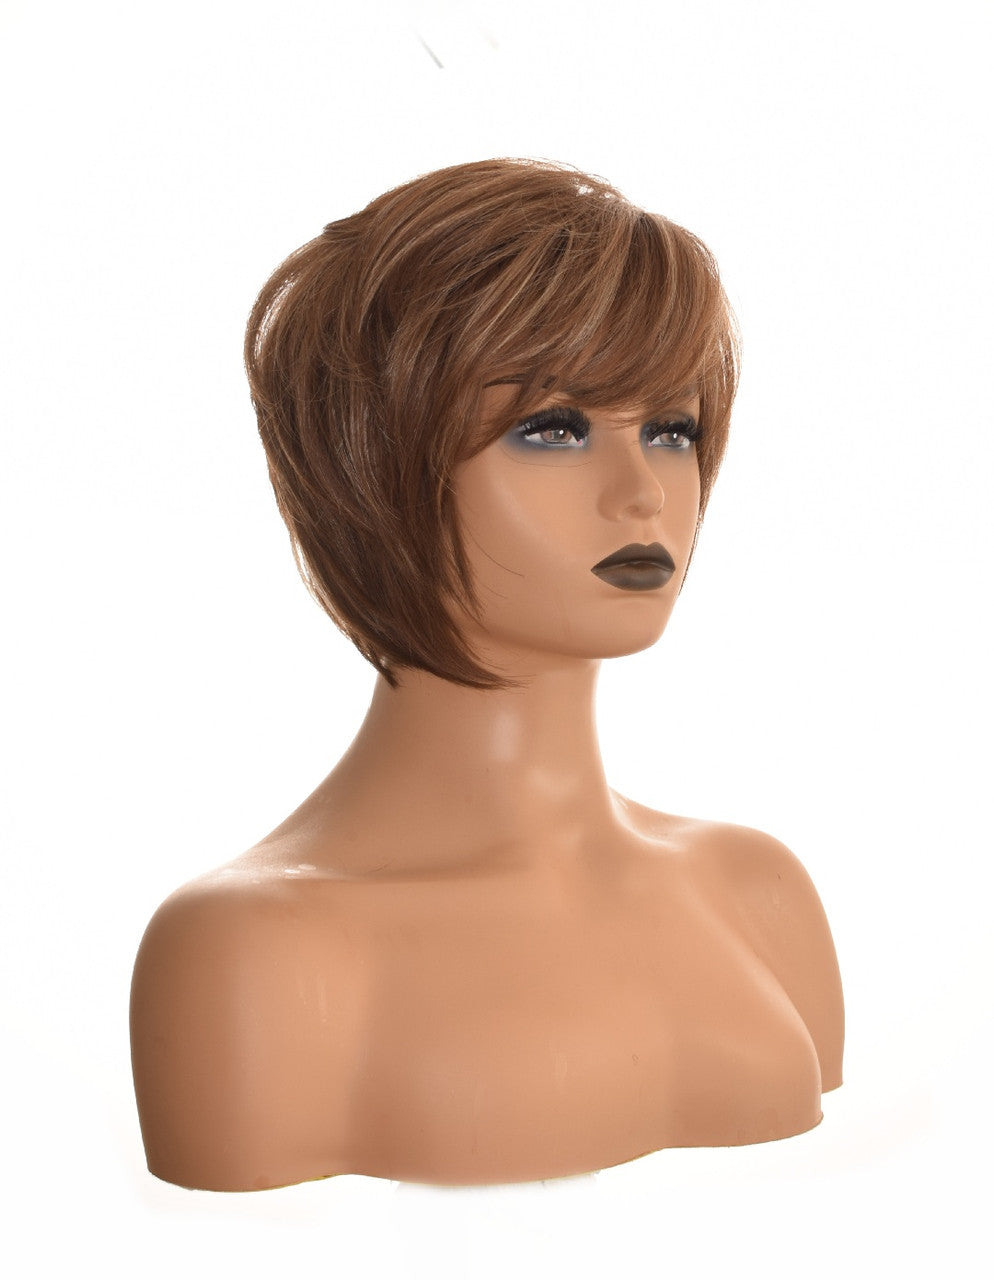 Short Chic Pageboy Brown with Blonde Highlights Wig. Pia